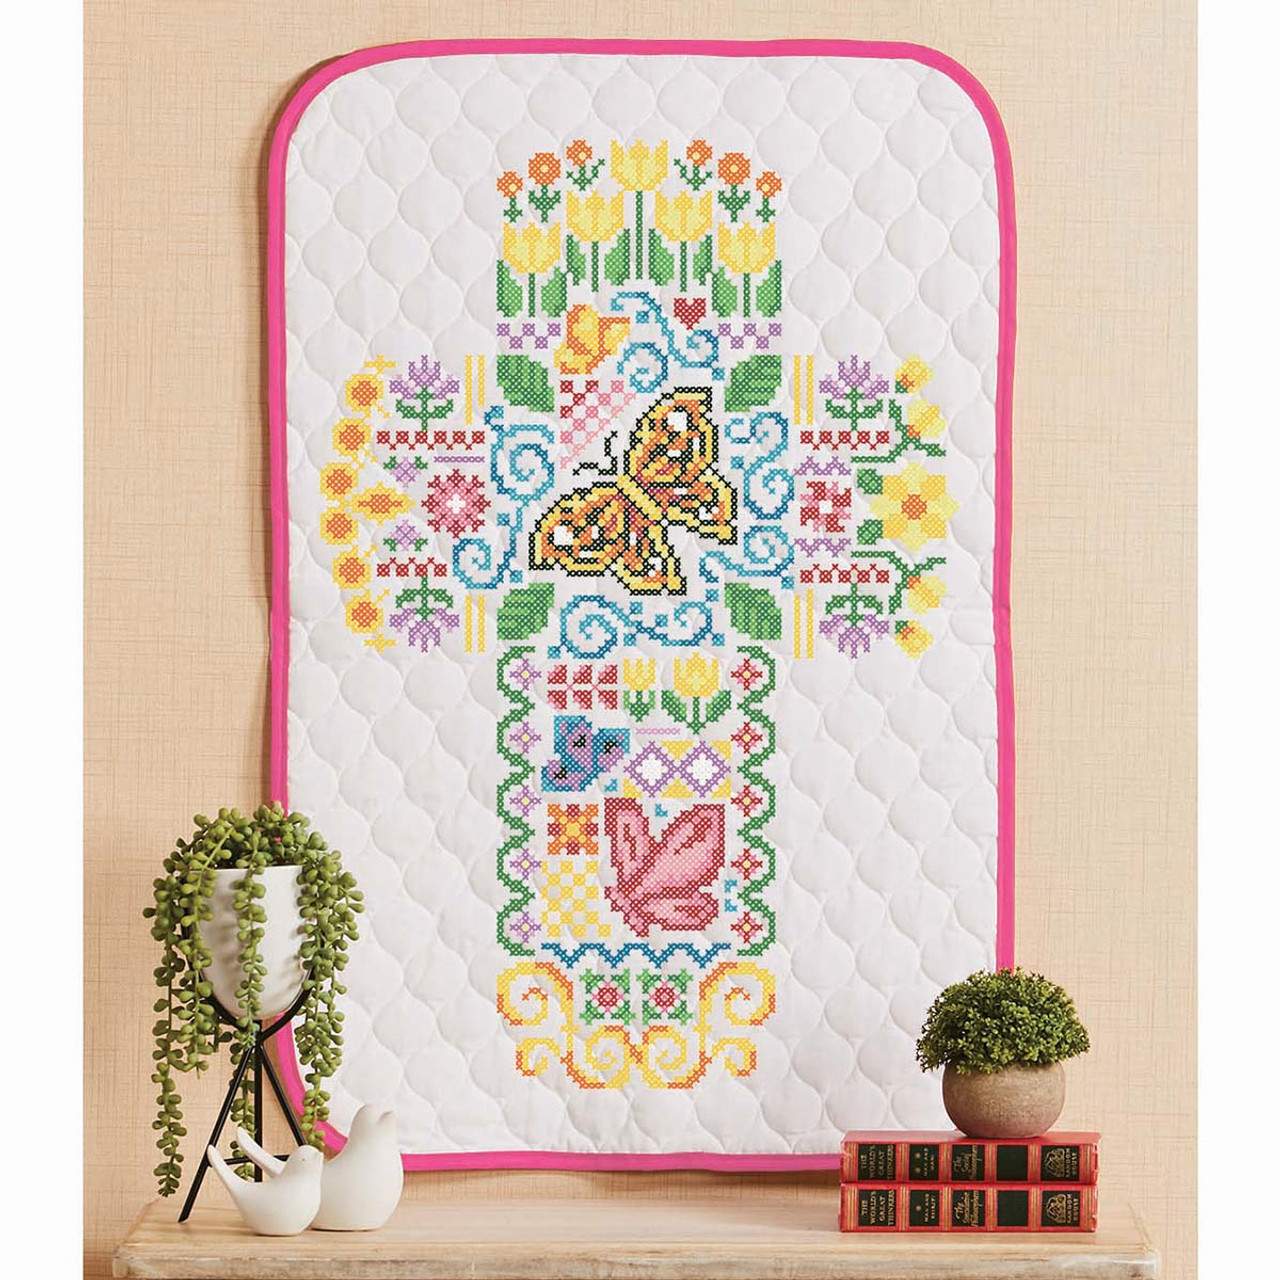 CaptainCrafts New DIY Art Stamped Cross Stitch Kit Pre-Printed Pattern Counted Embroidery Kits - Baby Monkey (Stamped)